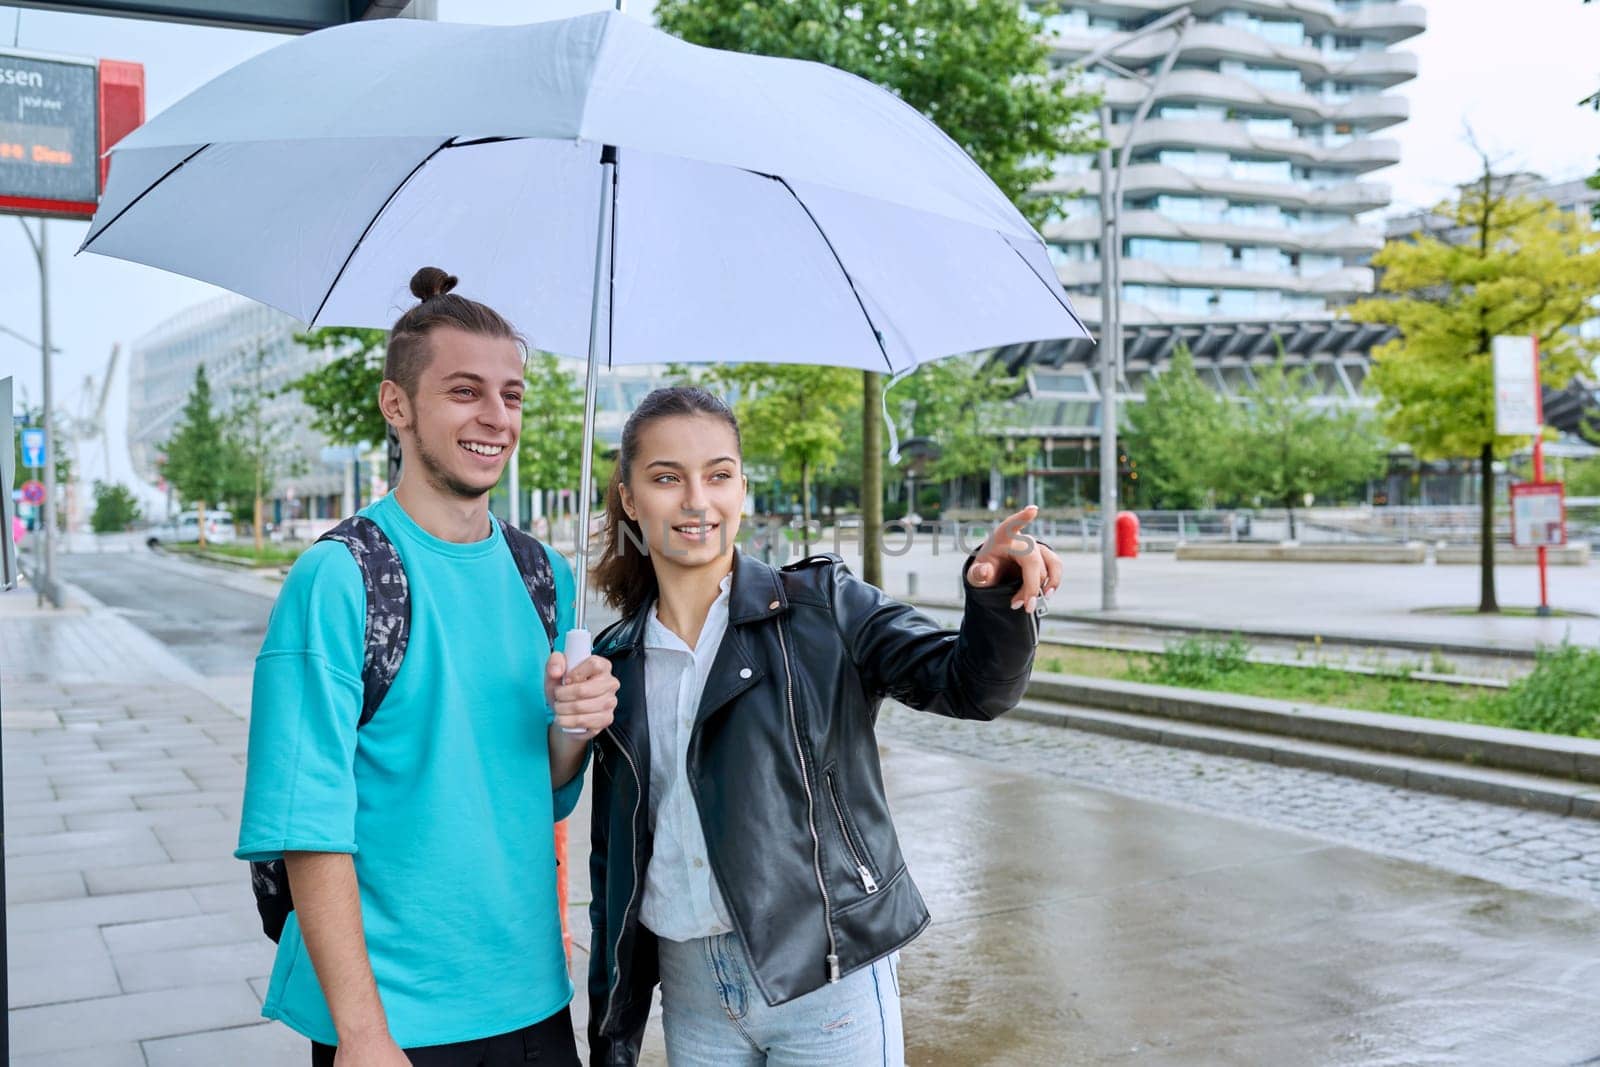 Teenagers guy and girl at bus stop under an umbrella waiting for city bus by VH-studio